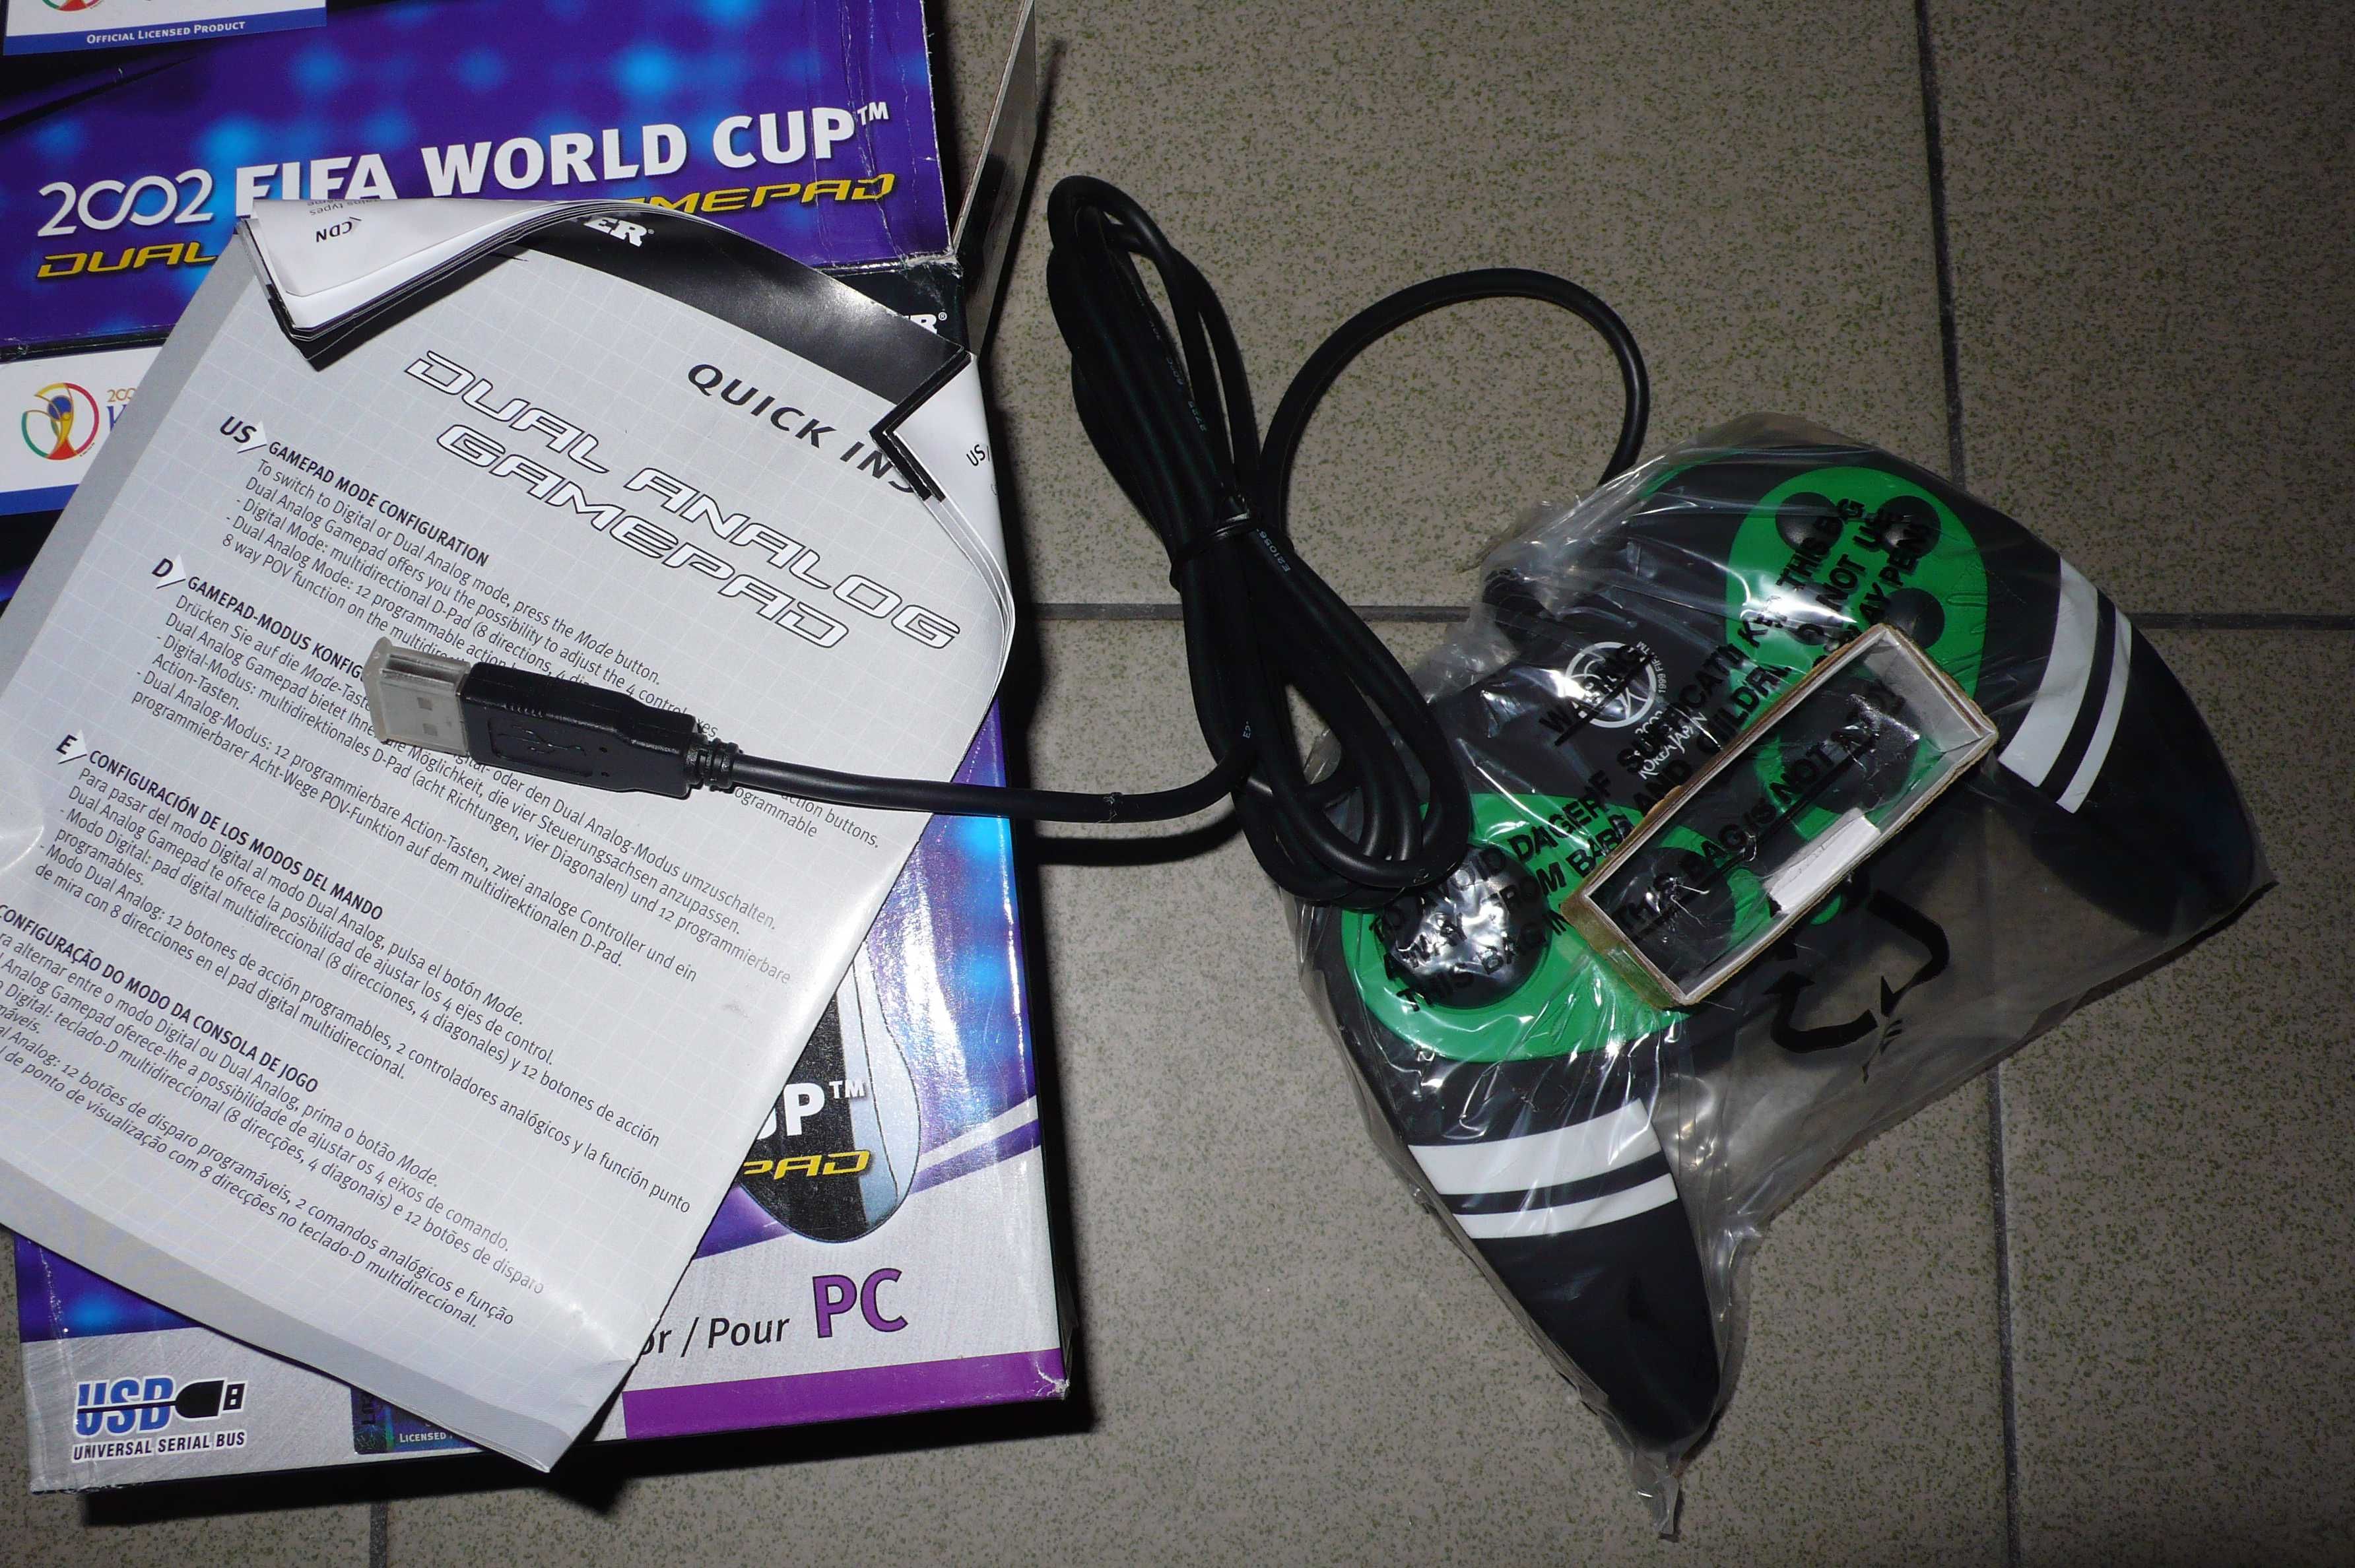 Pad przewodowy do pc laptop Thrustmaster 2002 Fifa World Cup nowy